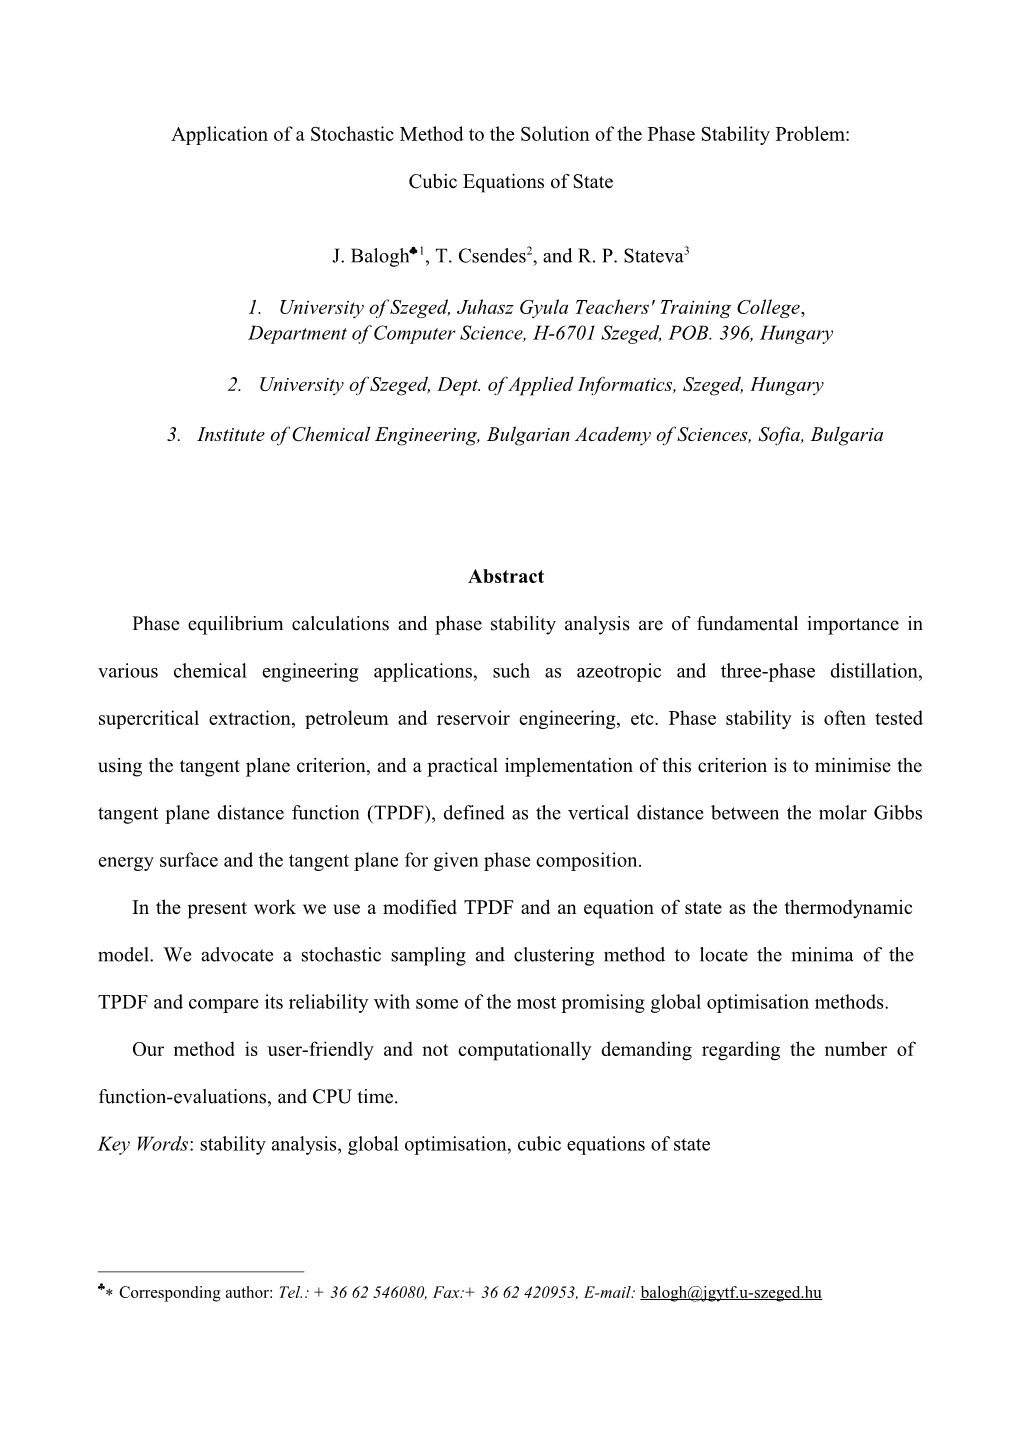 Application of a Stochastic Method to the Solution of the Phase Stability Problem